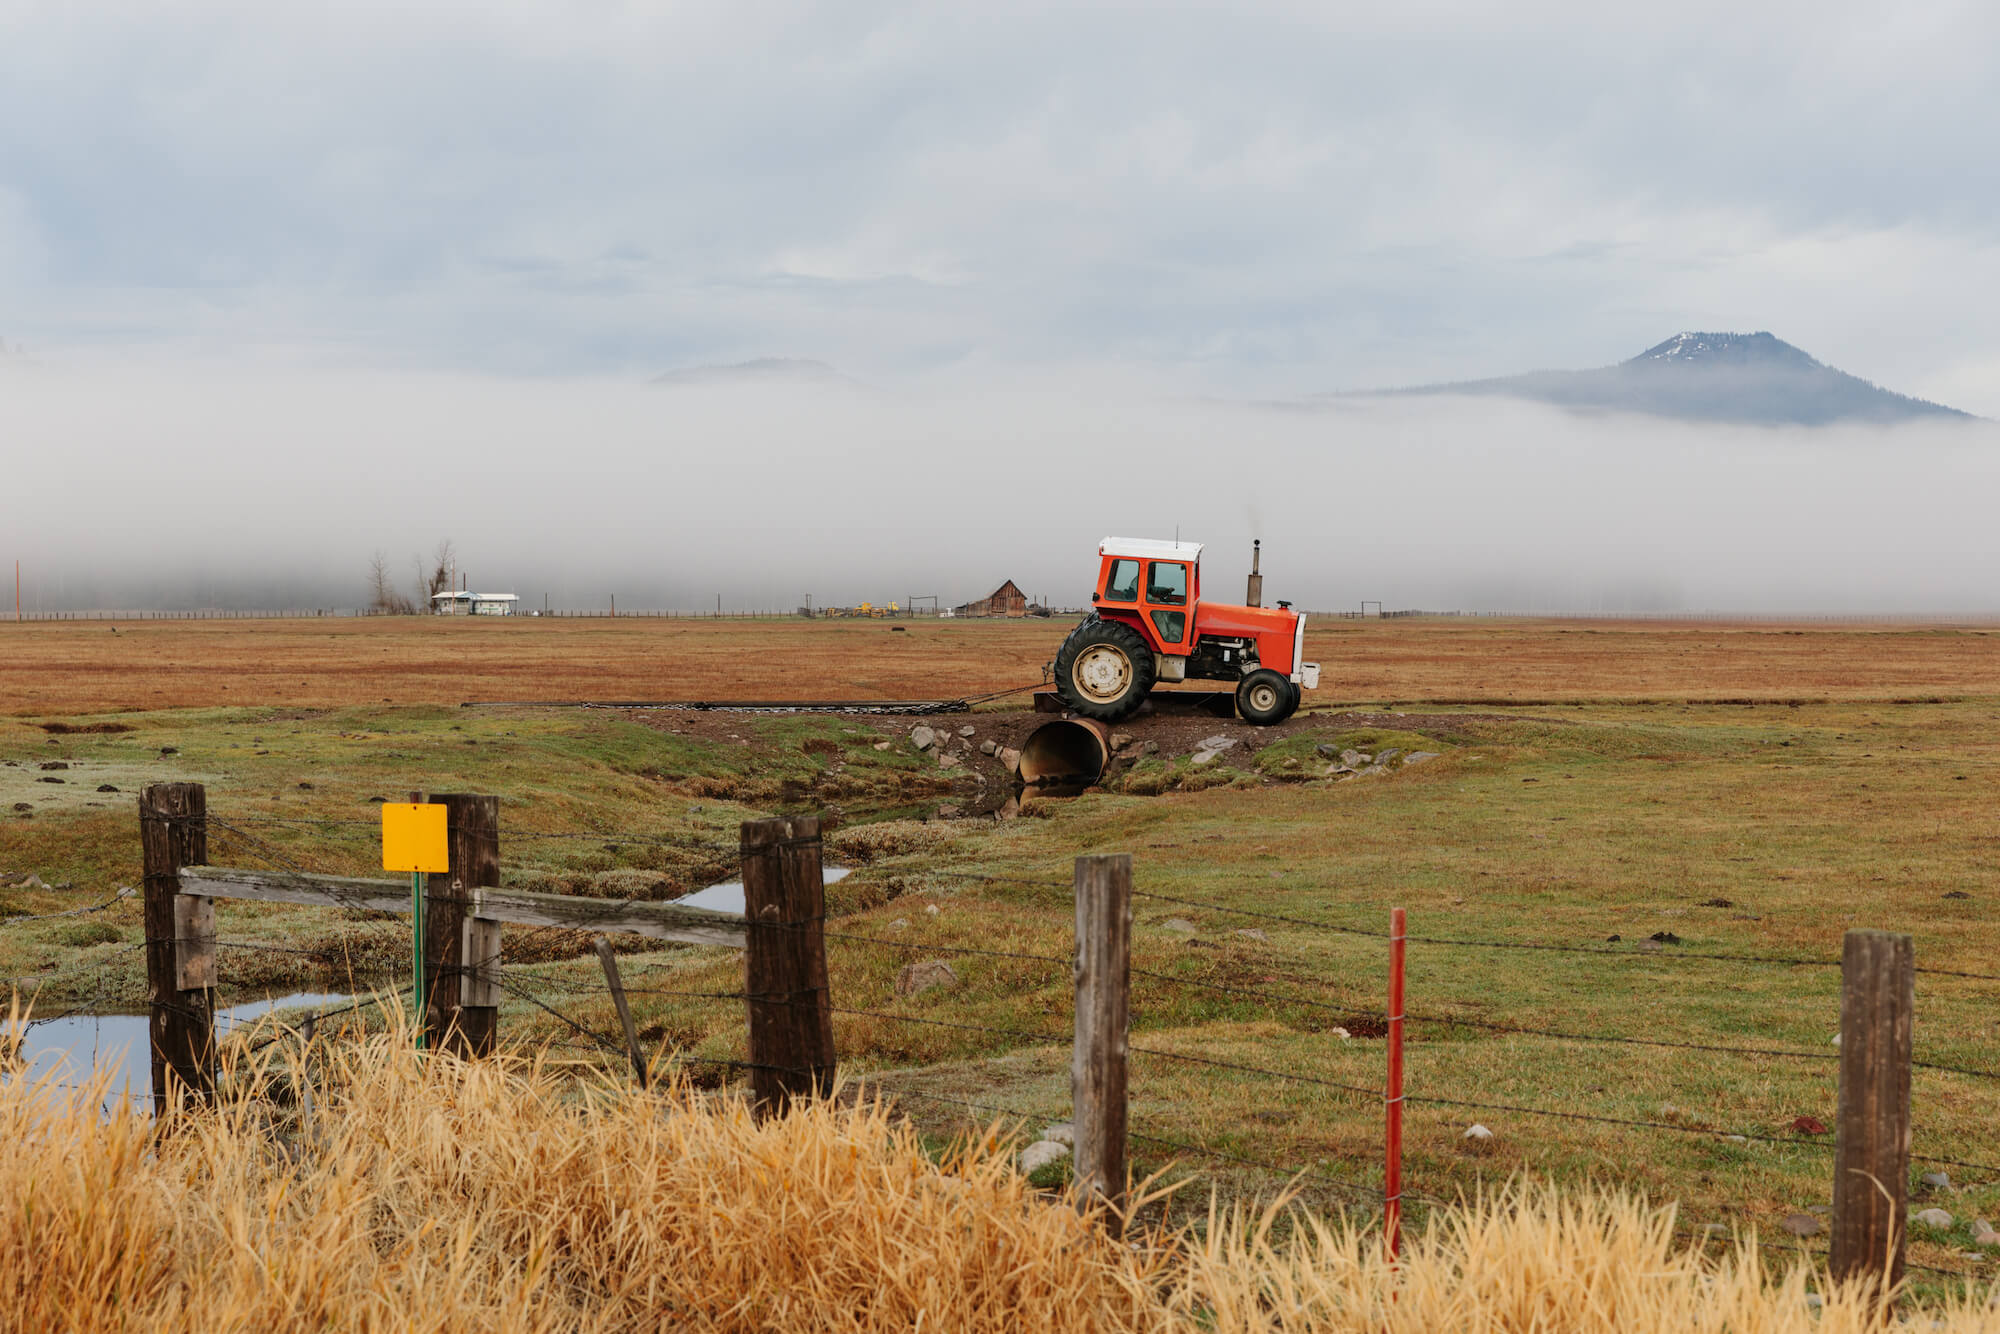 An orange tractor on the horizon of grass with clouds covering the mountains in the distance. Klamath, OR 111921